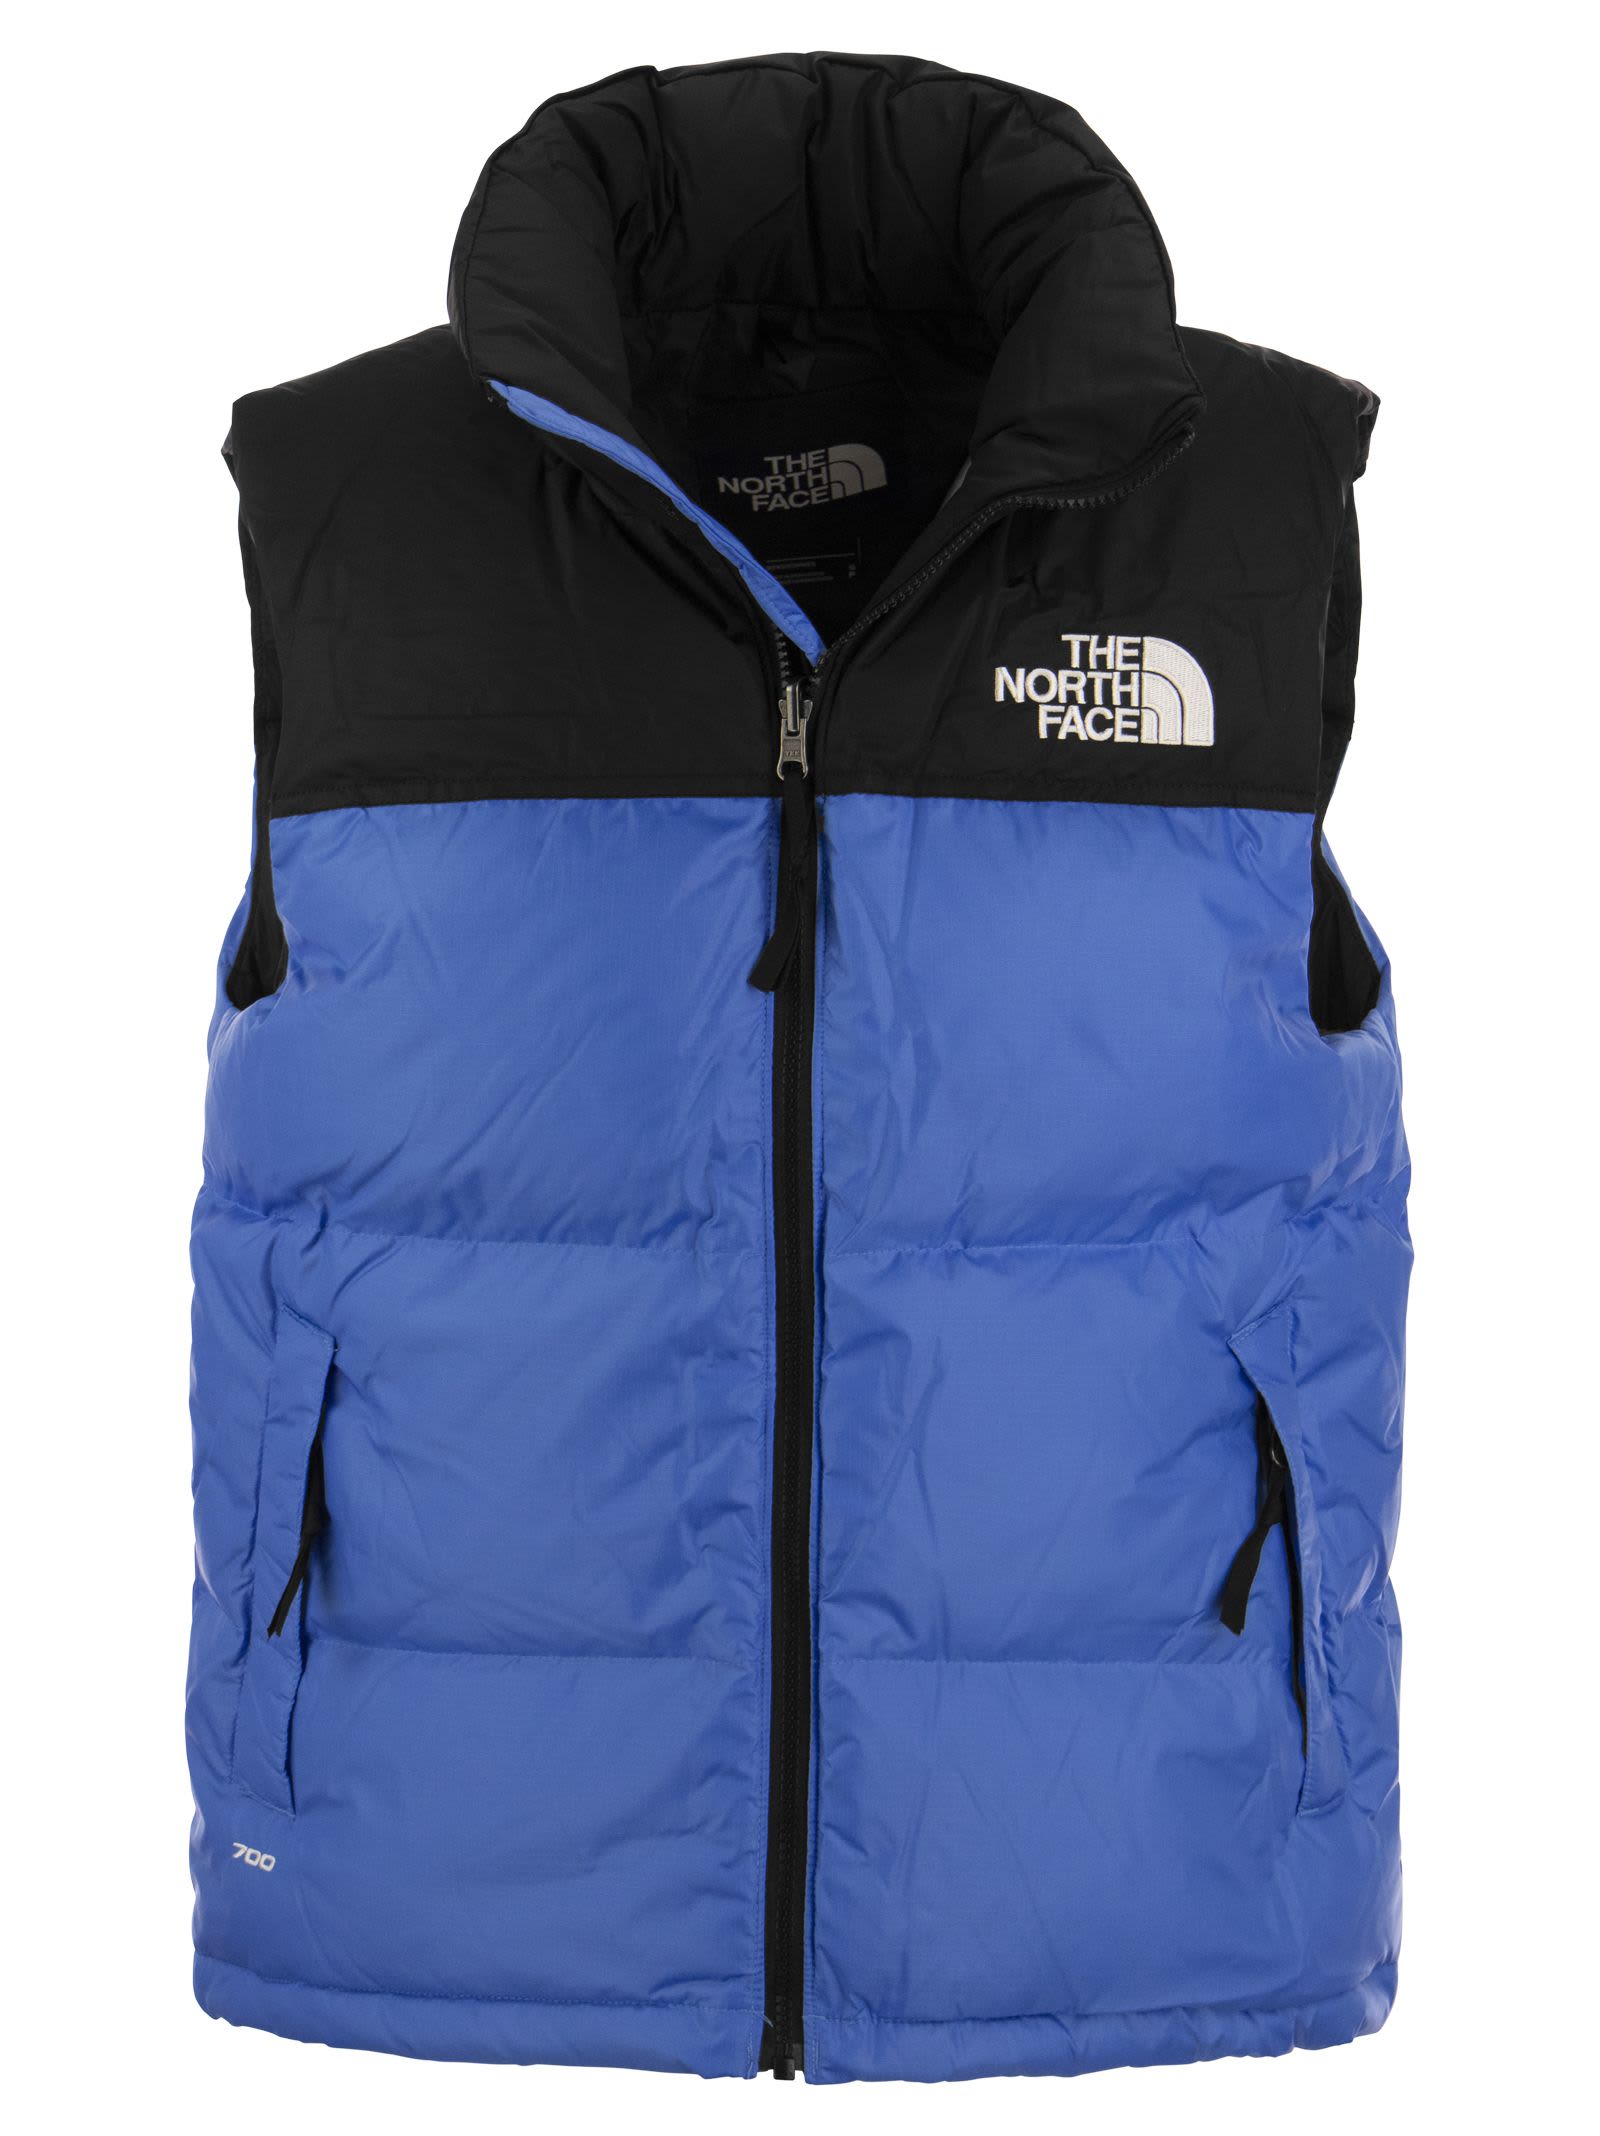 THE NORTH FACE RETRO 1996 - PADDED VEST